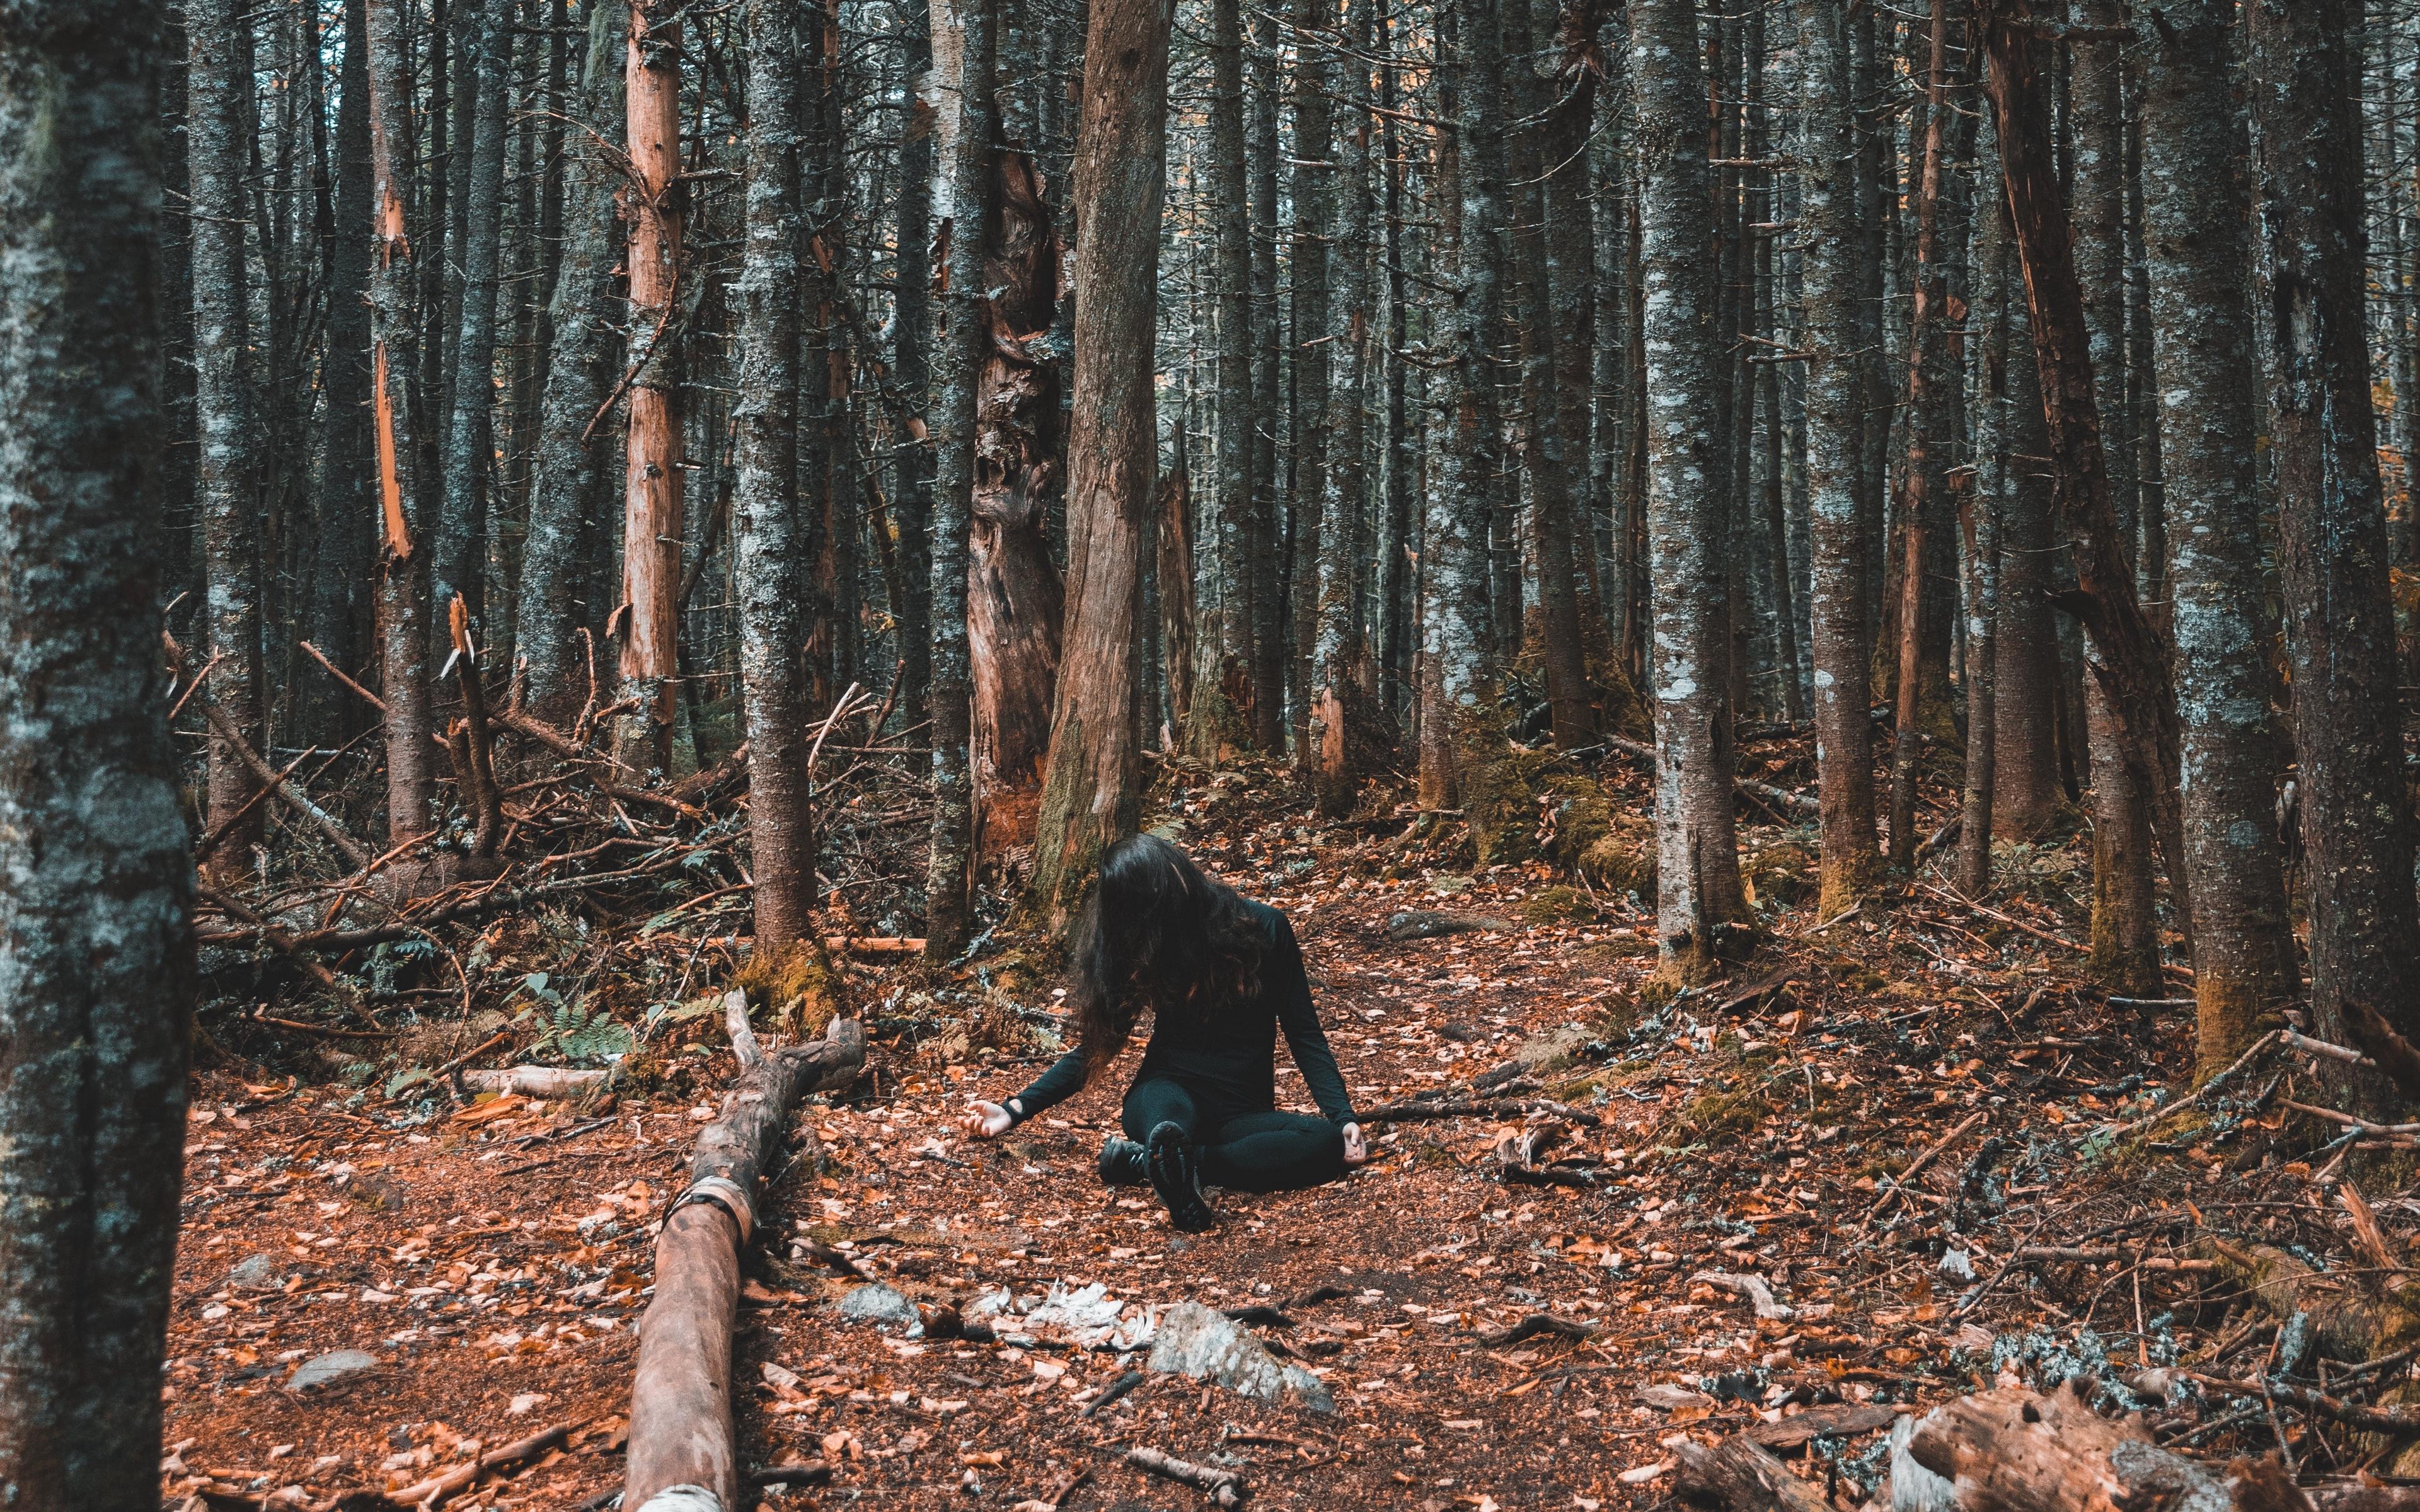 Download wallpaper 3840x2400 forest, girl, loneliness, trees